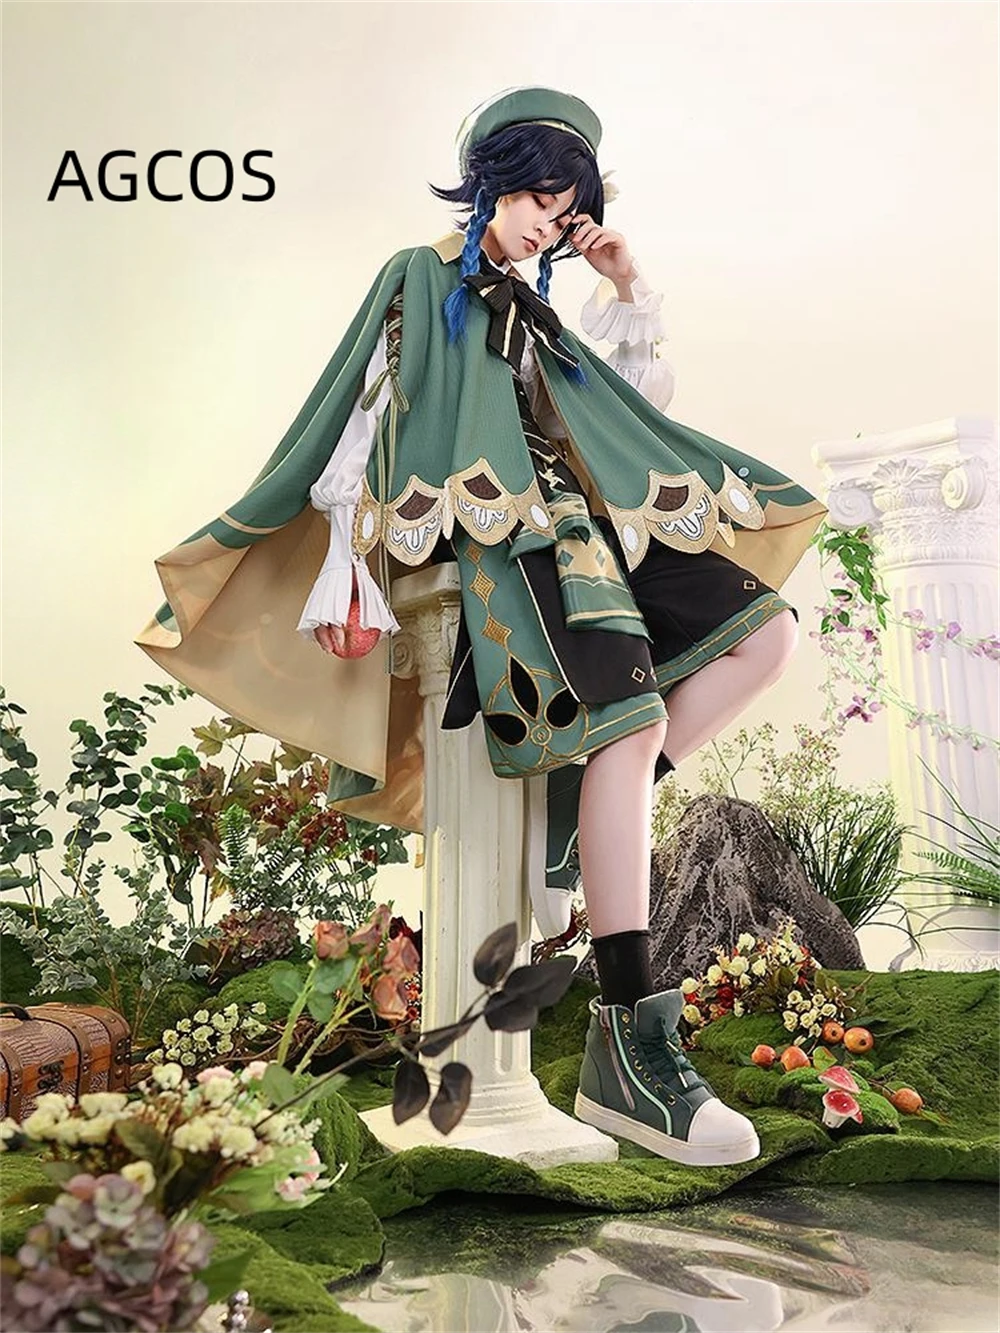 

AGCOS Barbatos Apple Toast Cosplay Game Genshin Impact Venti Doujin Cosplay Costume Christmas Roleplay Dress Costumes